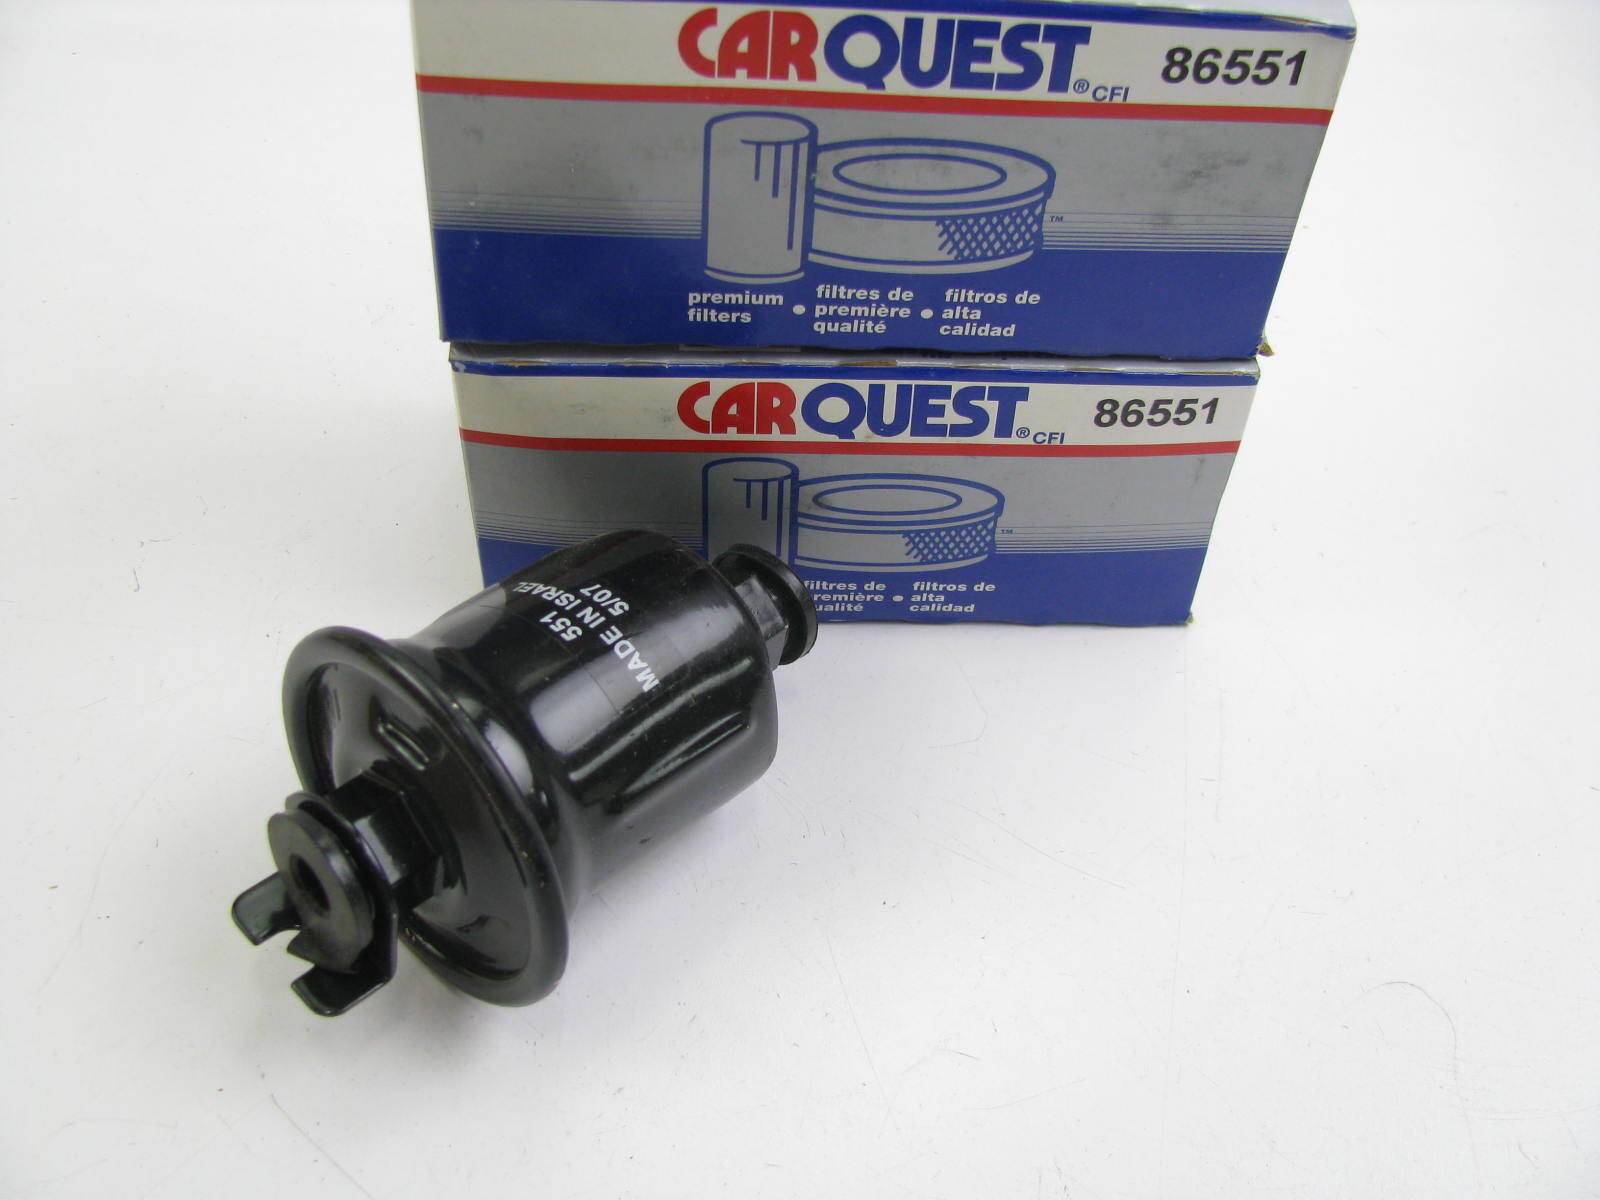 (2) Carquest 86551 Fuel Filter Replaces G8123 33551 F45115 G6547 GF309 BF7659